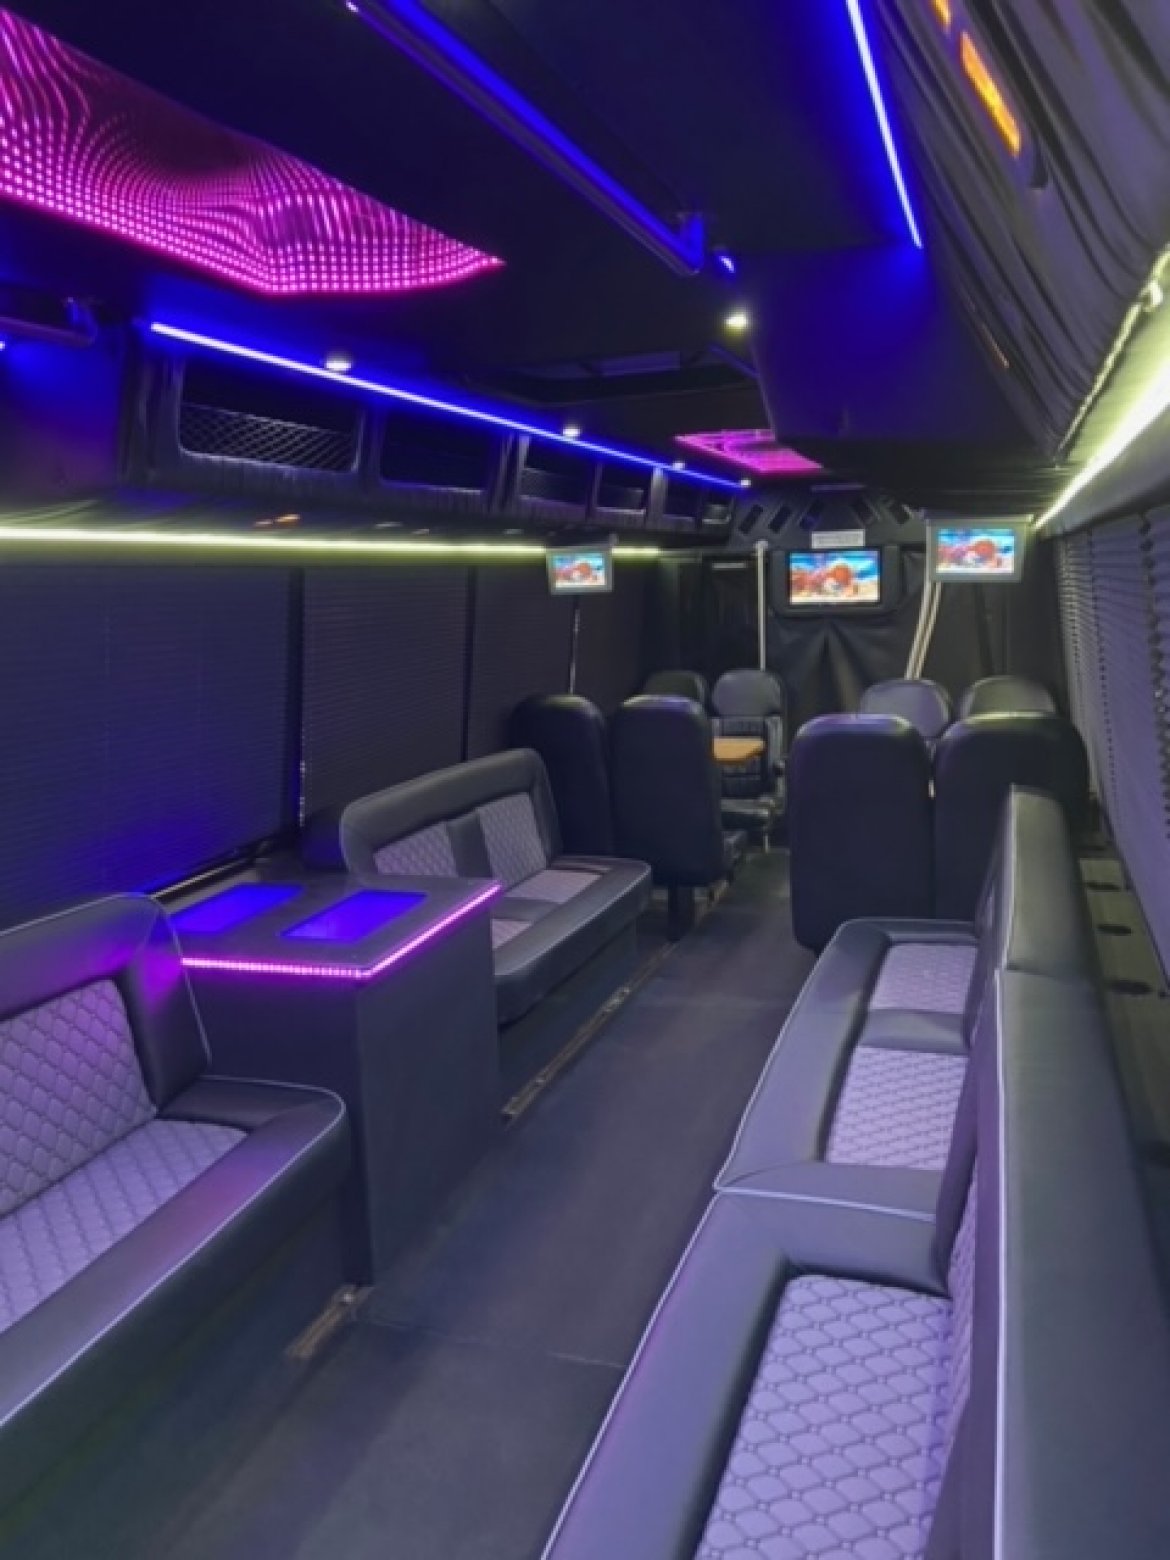 Limo Bus for sale: 2012 Freightliner Limo Coach by Ameritrans